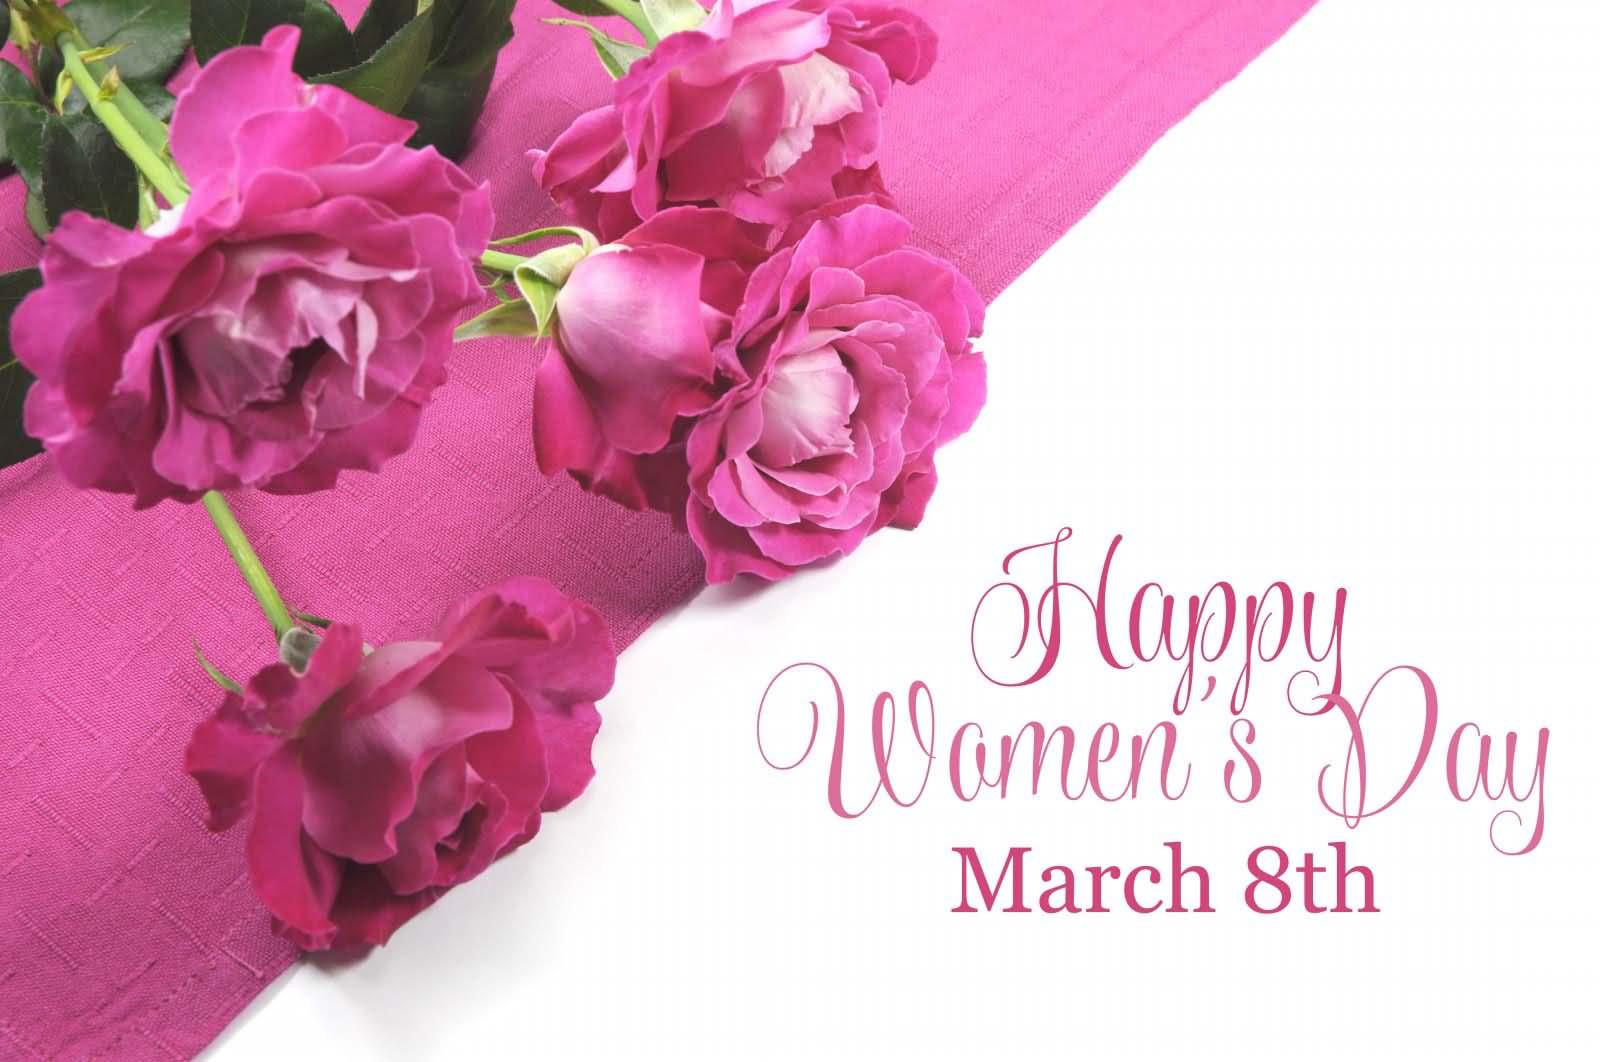 Happy Womens Day HD Image, Wallpaper, Pics -Free Download 13